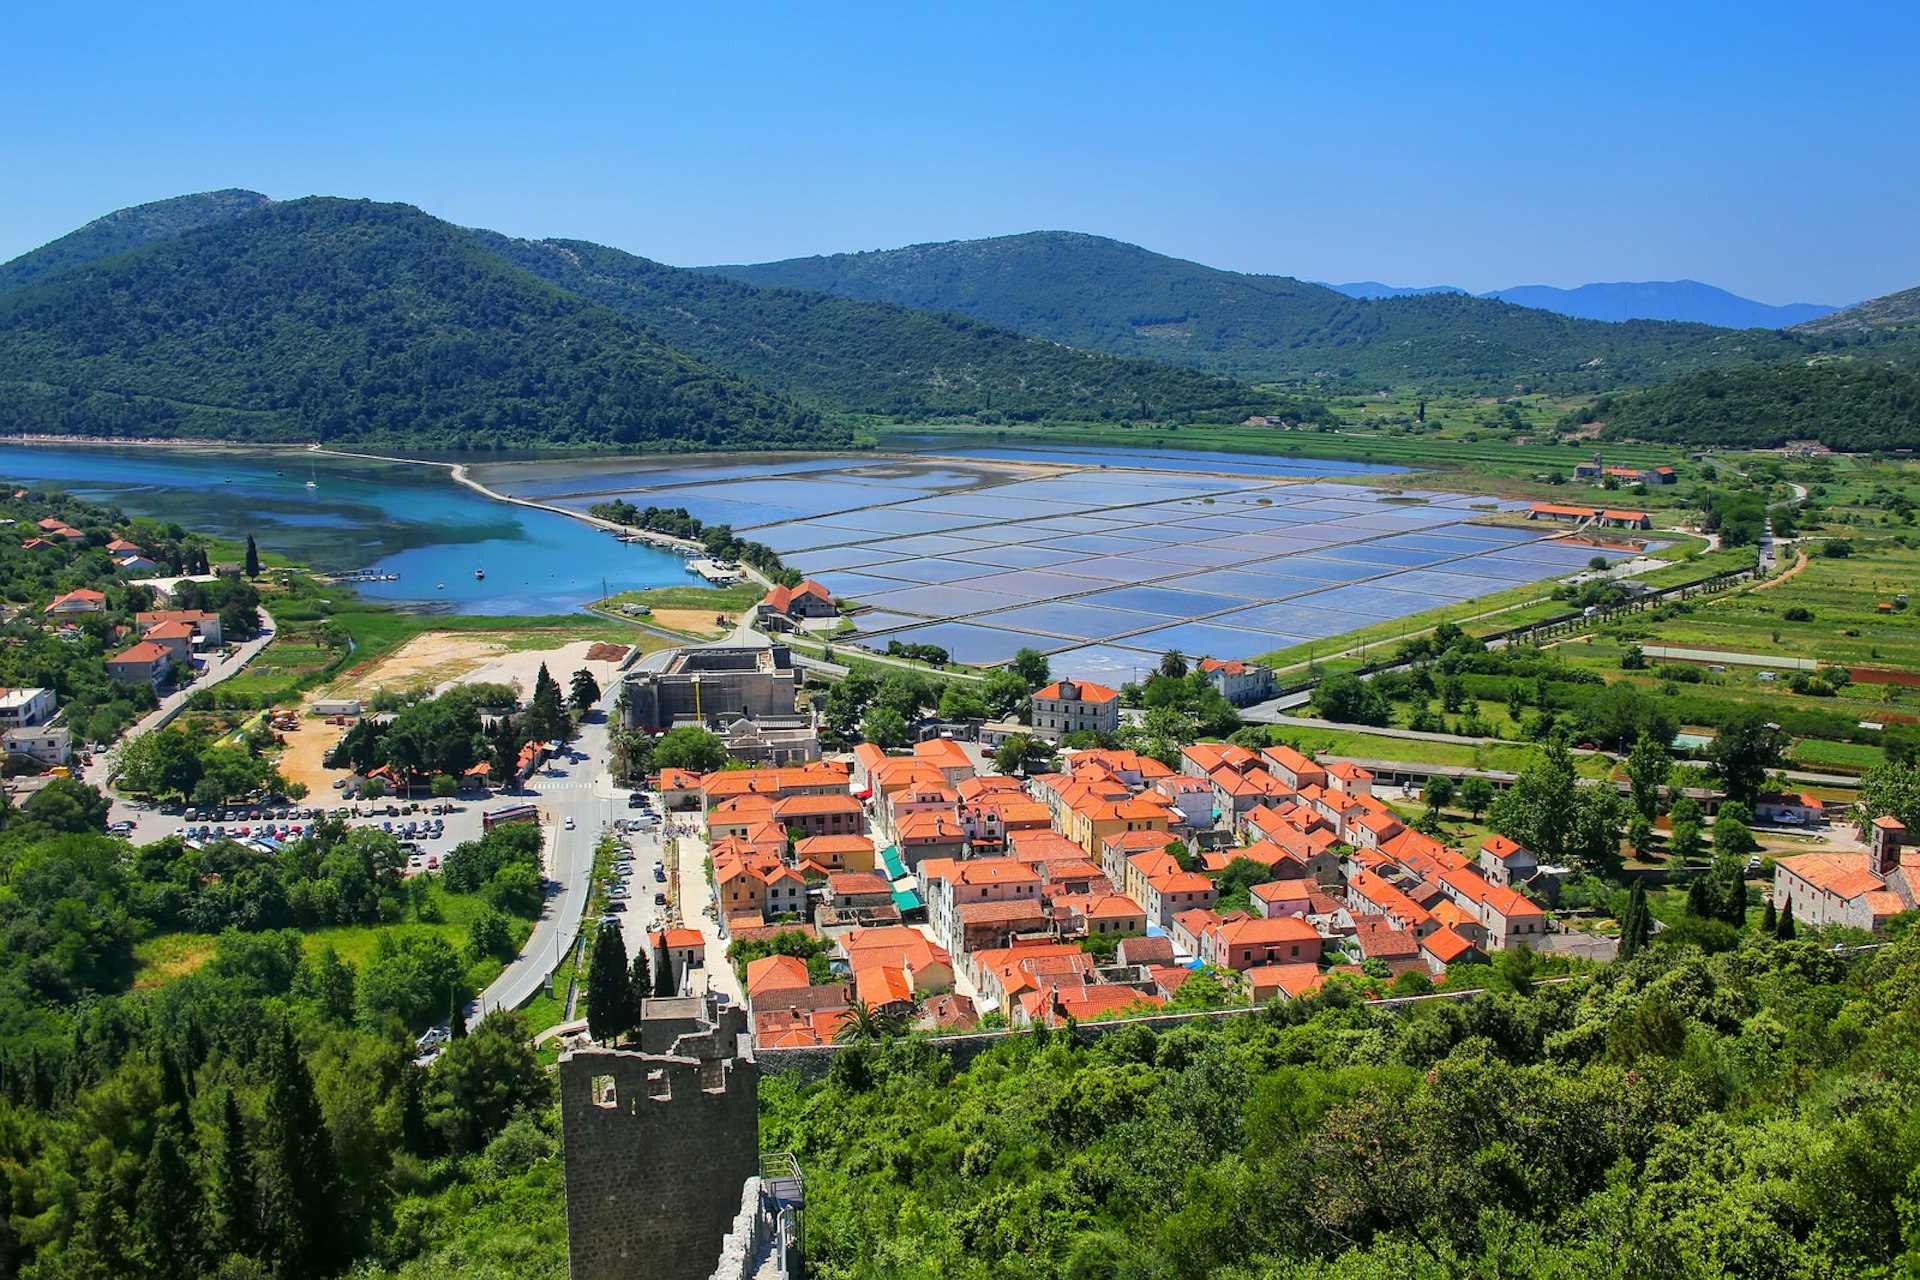 View of Ston town and salt pans from above; the town is a compact square of orange roofs, surrounded by green fields and trees; beyond are salt pans and forested peaks.